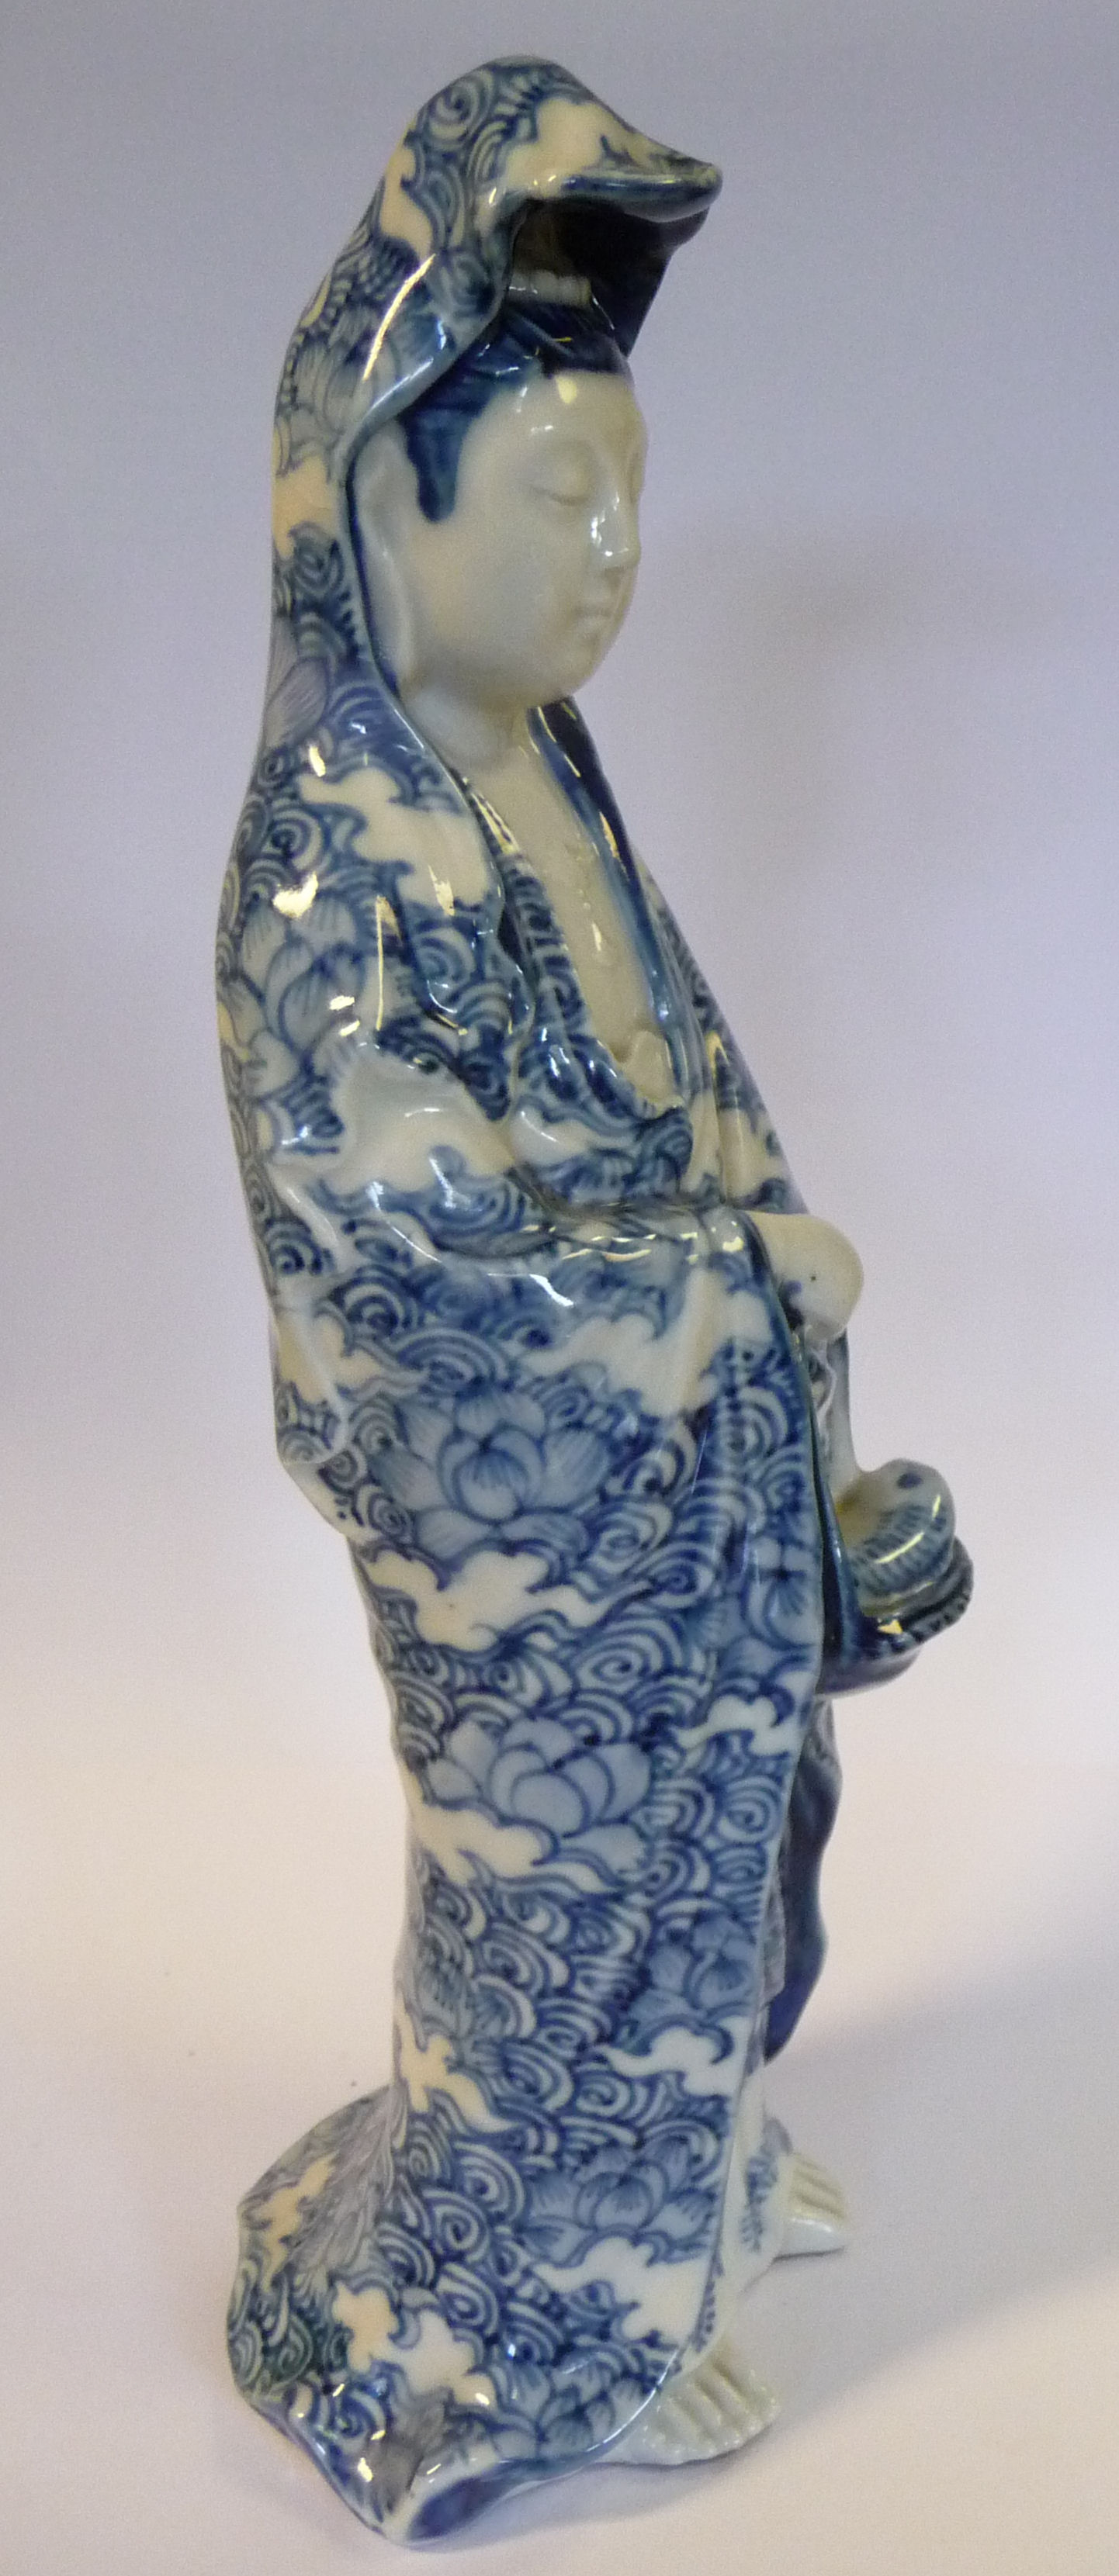 An early 20thC Chinese porcelain standing figure, Guan Yin, holding a basket of fish, - Image 7 of 11